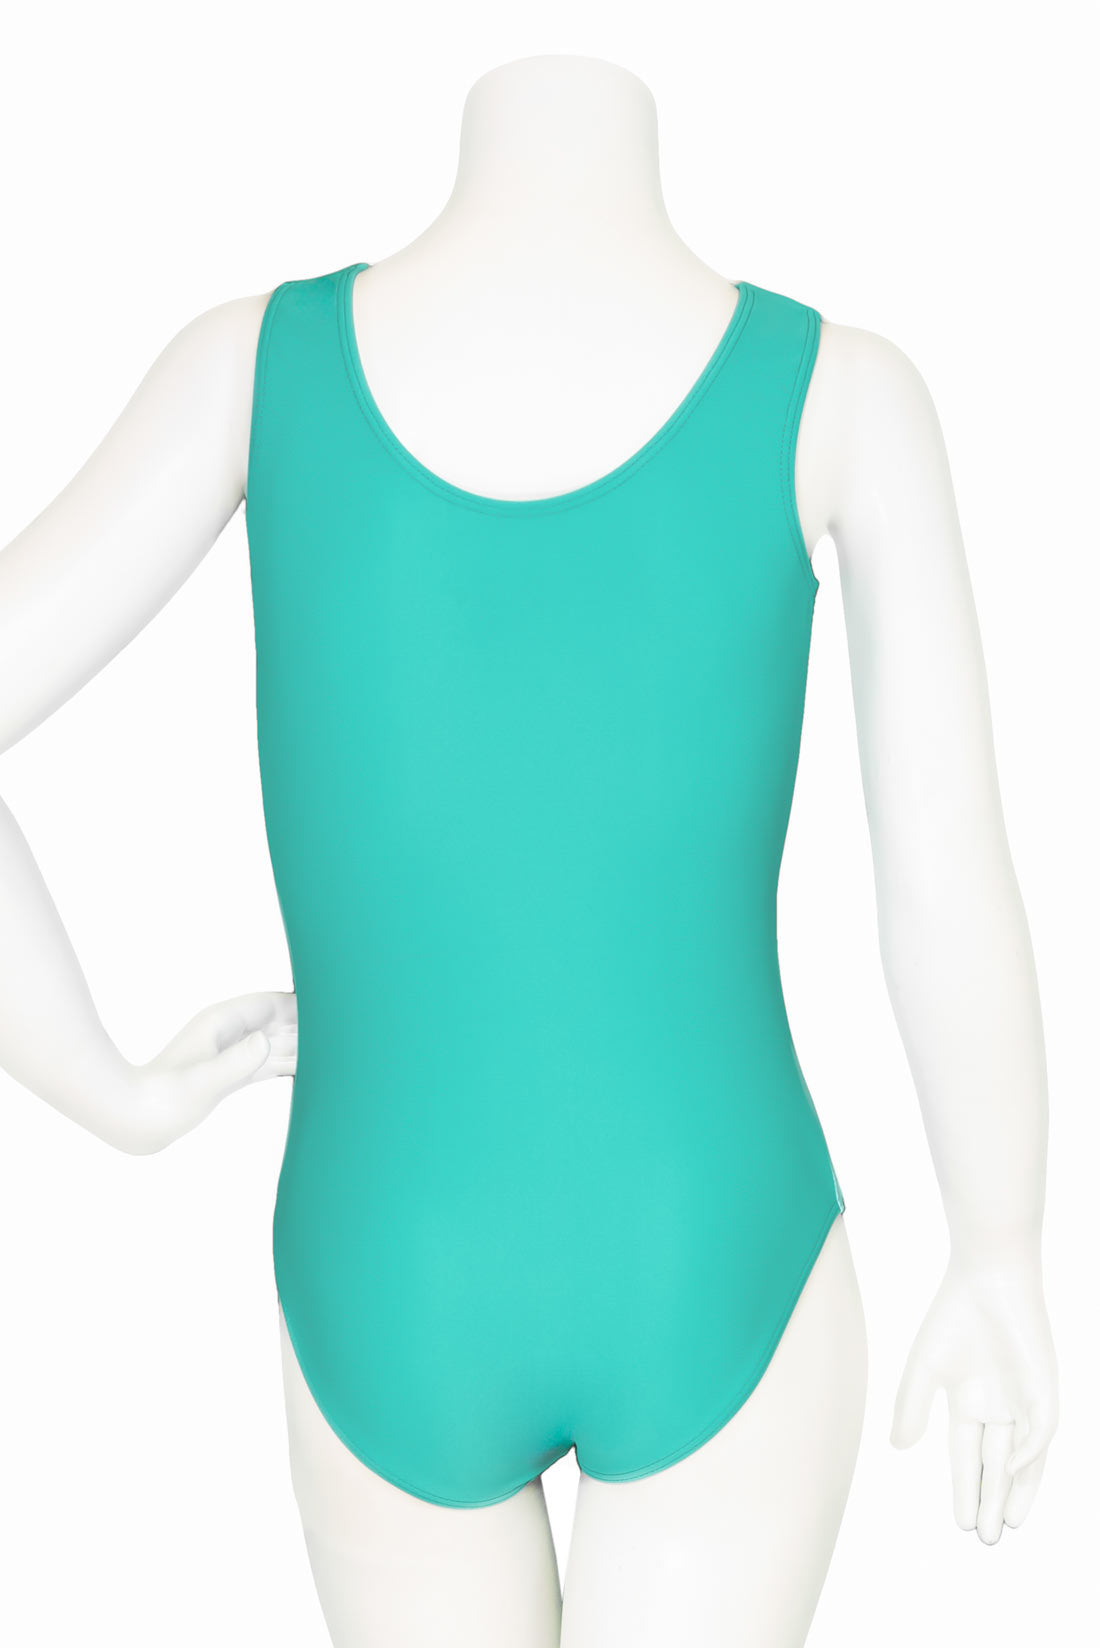 Green gym leo for workouts by Destira, 2024